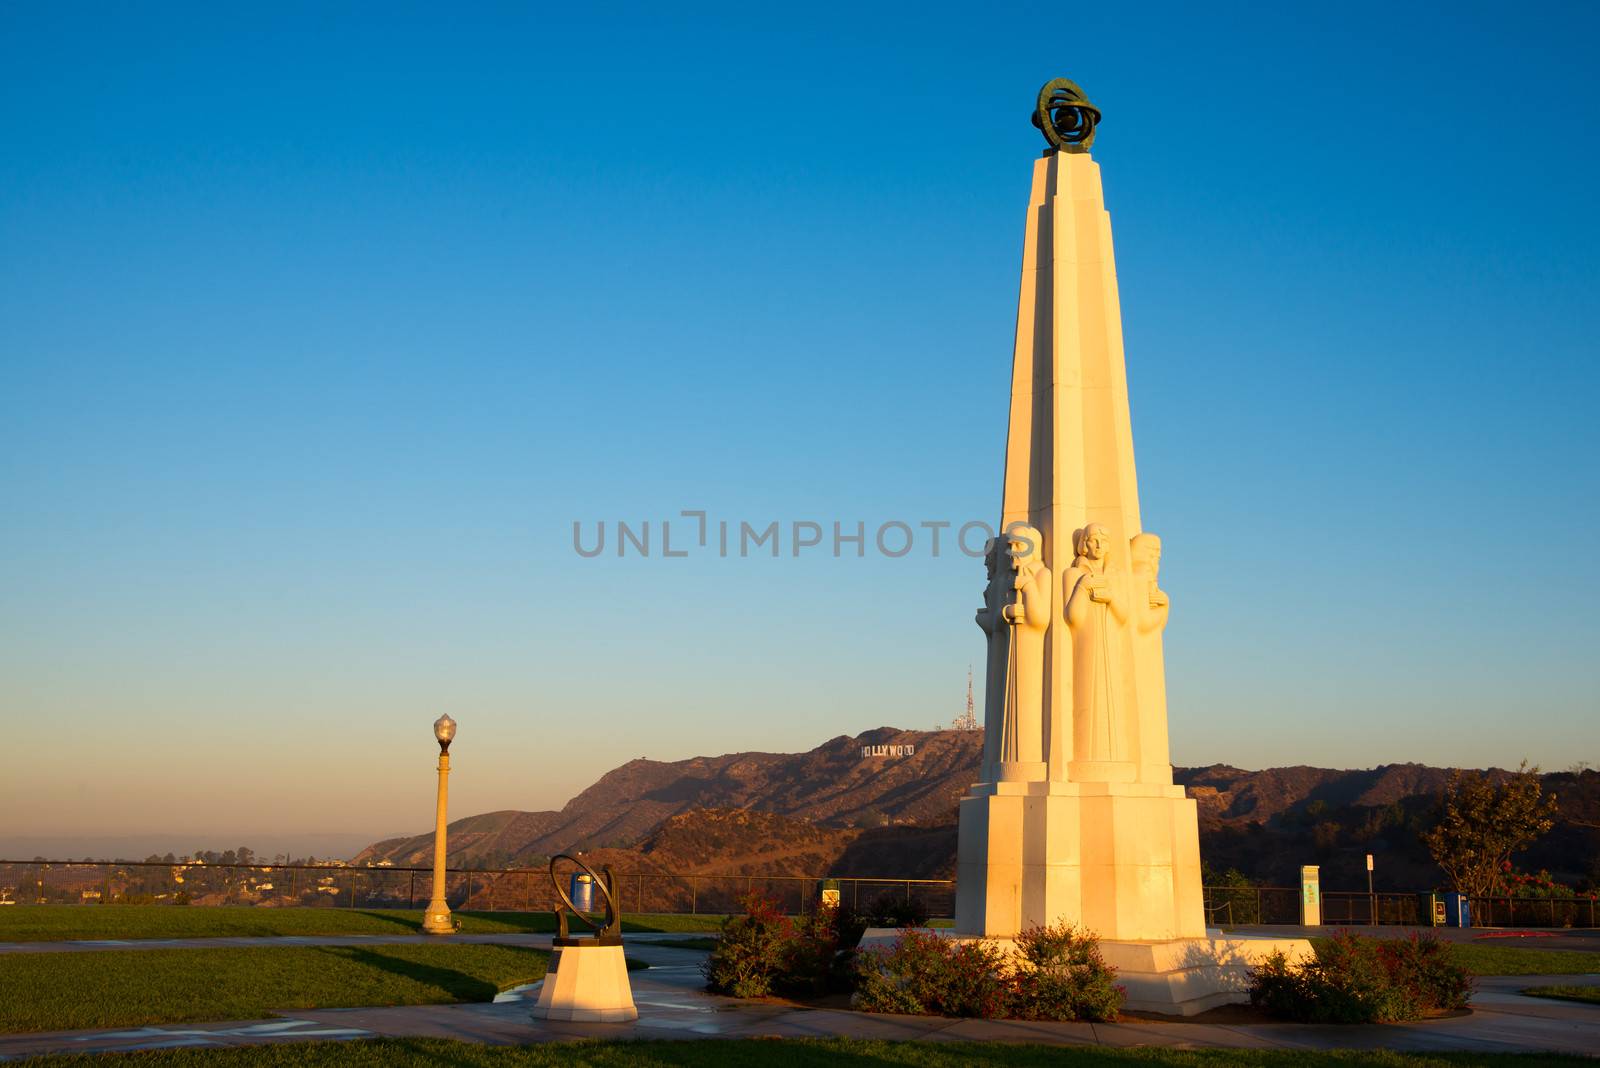 Astronomers Monument in Griffith Park, Los Angeles, California, USA